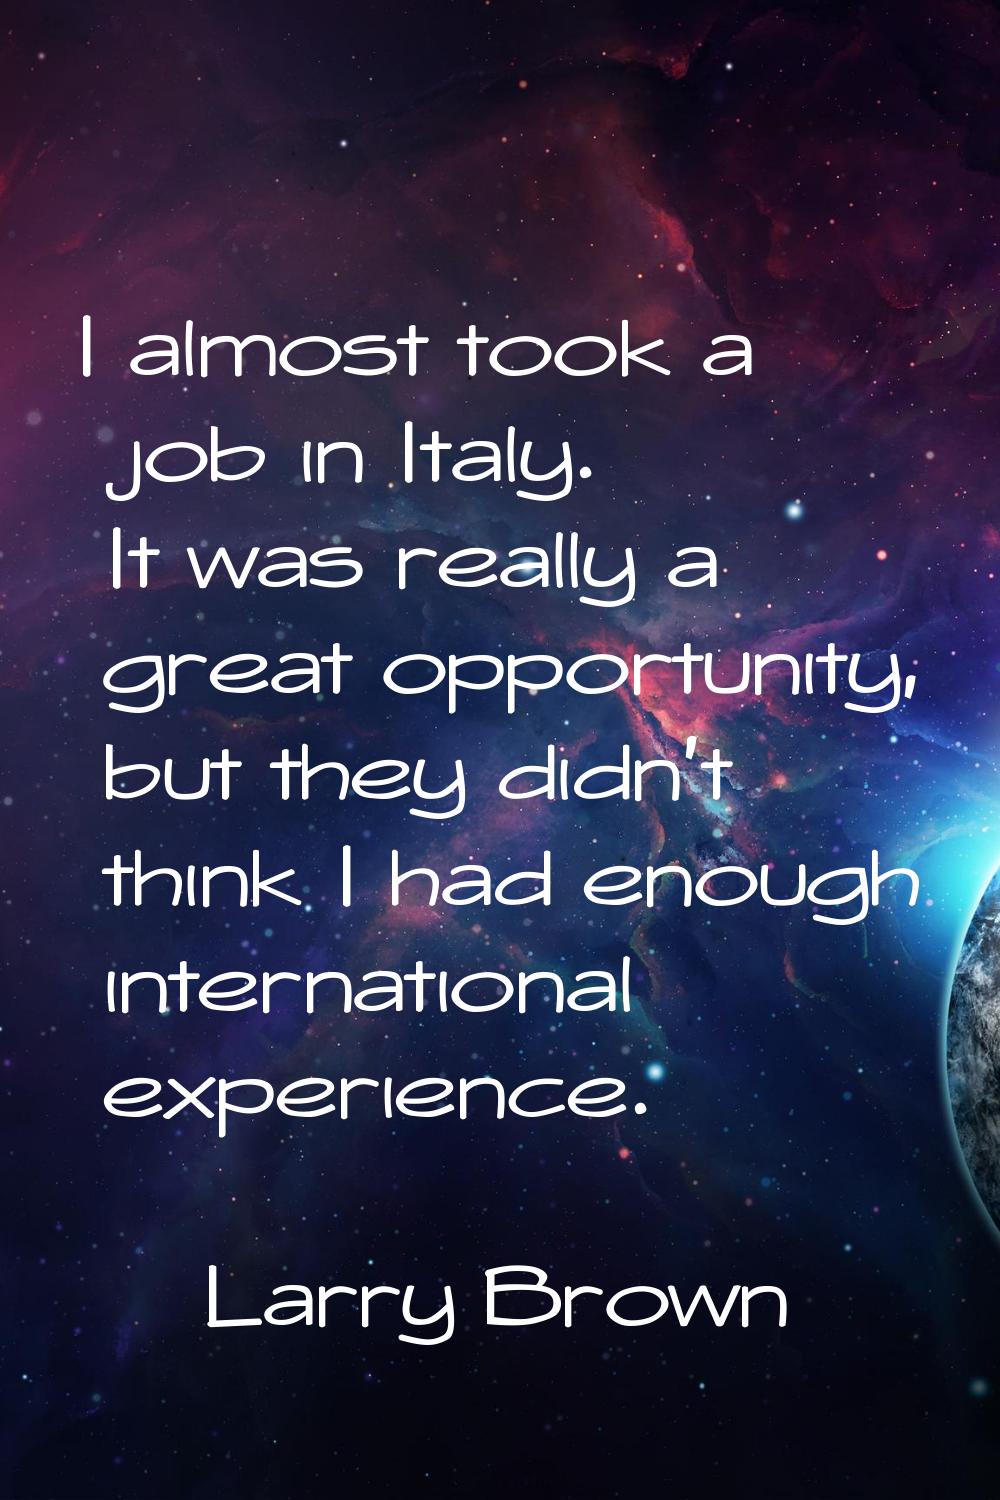 I almost took a job in Italy. It was really a great opportunity, but they didn't think I had enough